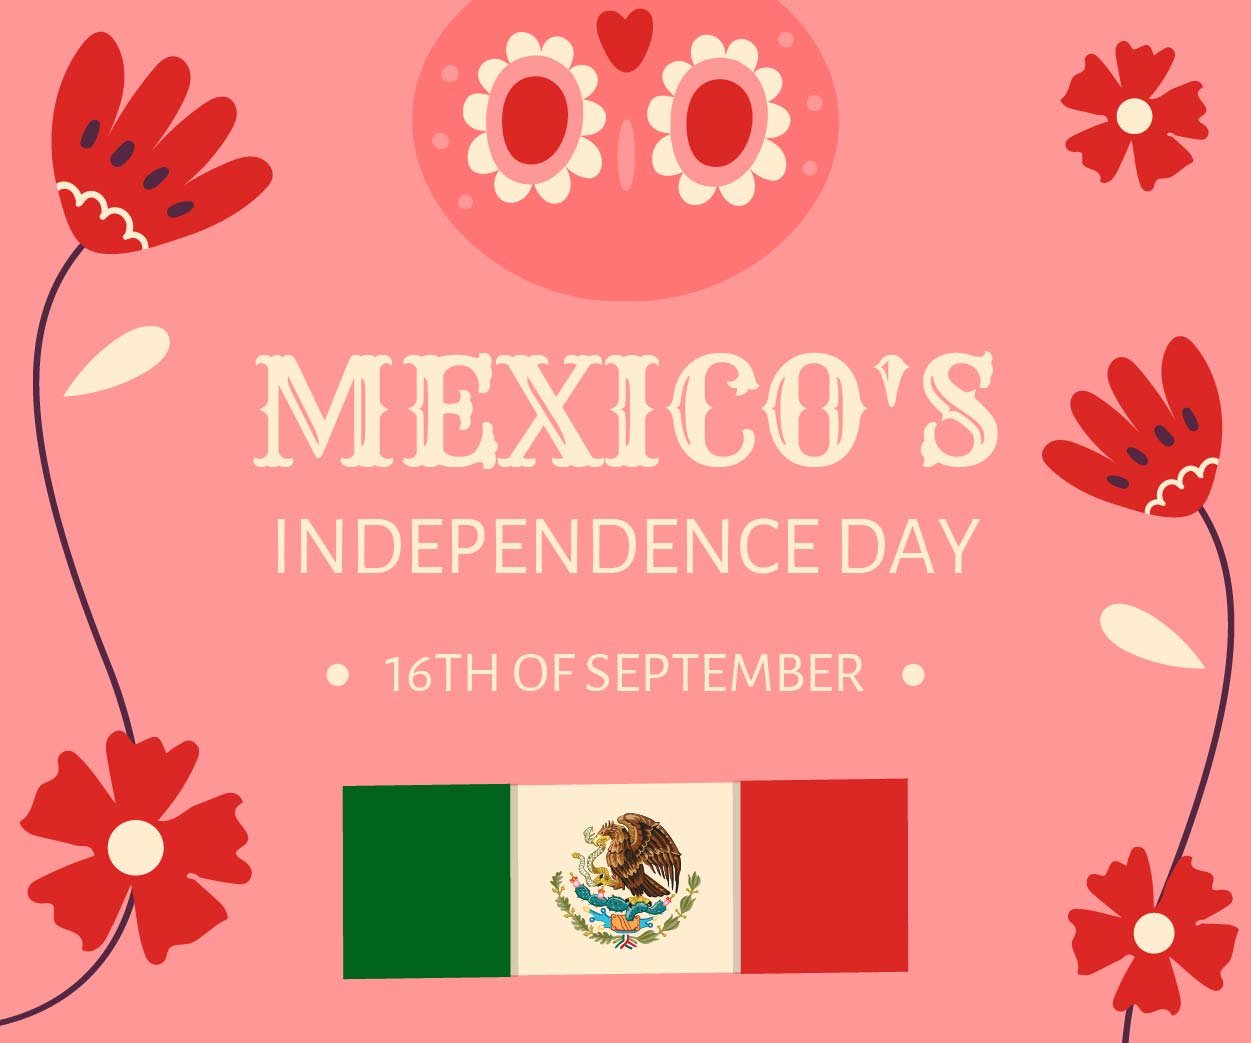 Mexican Independence Day Photo Banner in Illustrator, PSD, EPS, SVG, JPG, PNG